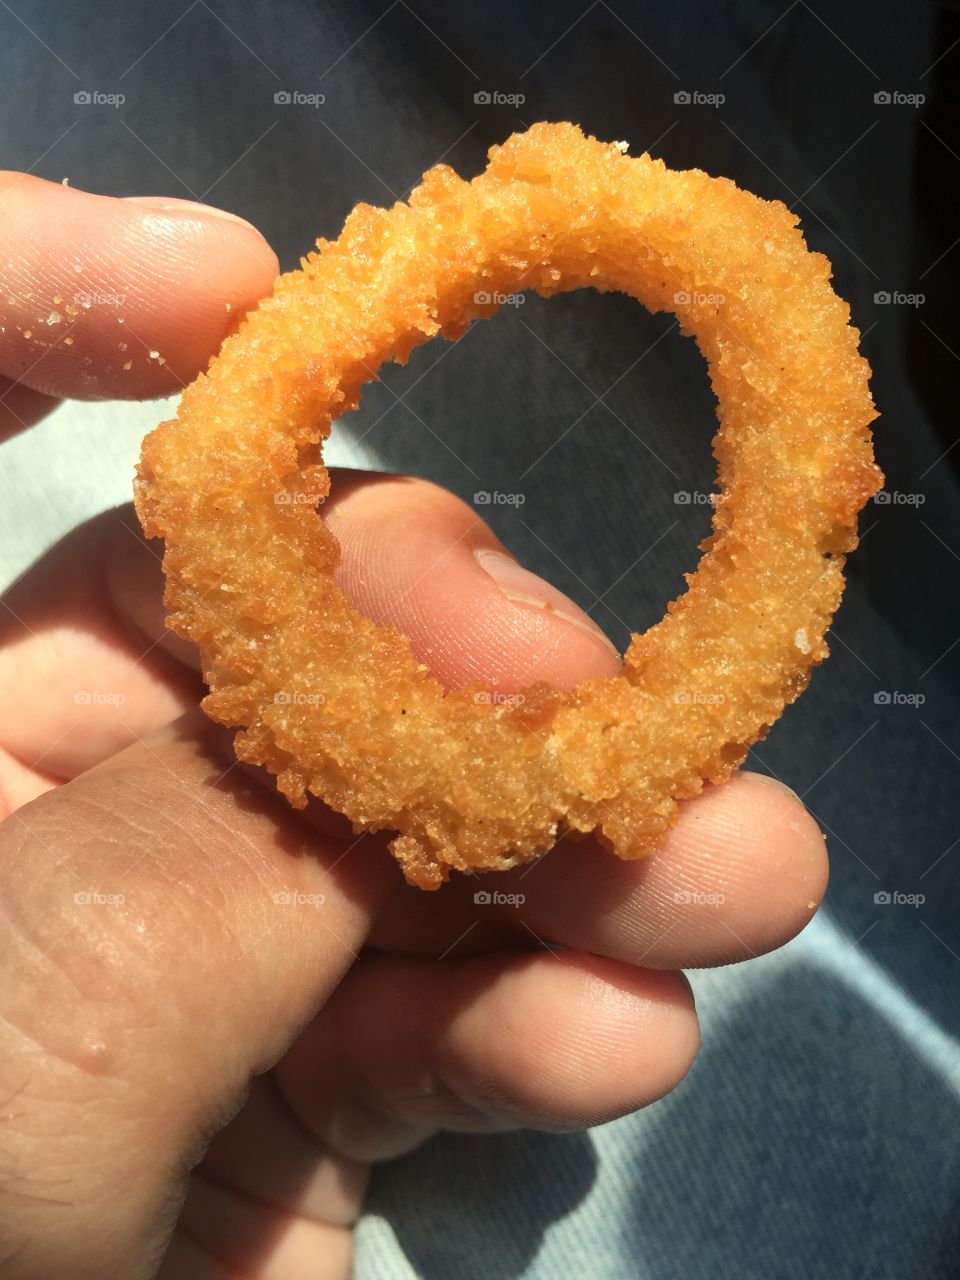 With This Ring.... A golden onion ring...just waiting to be eaten!